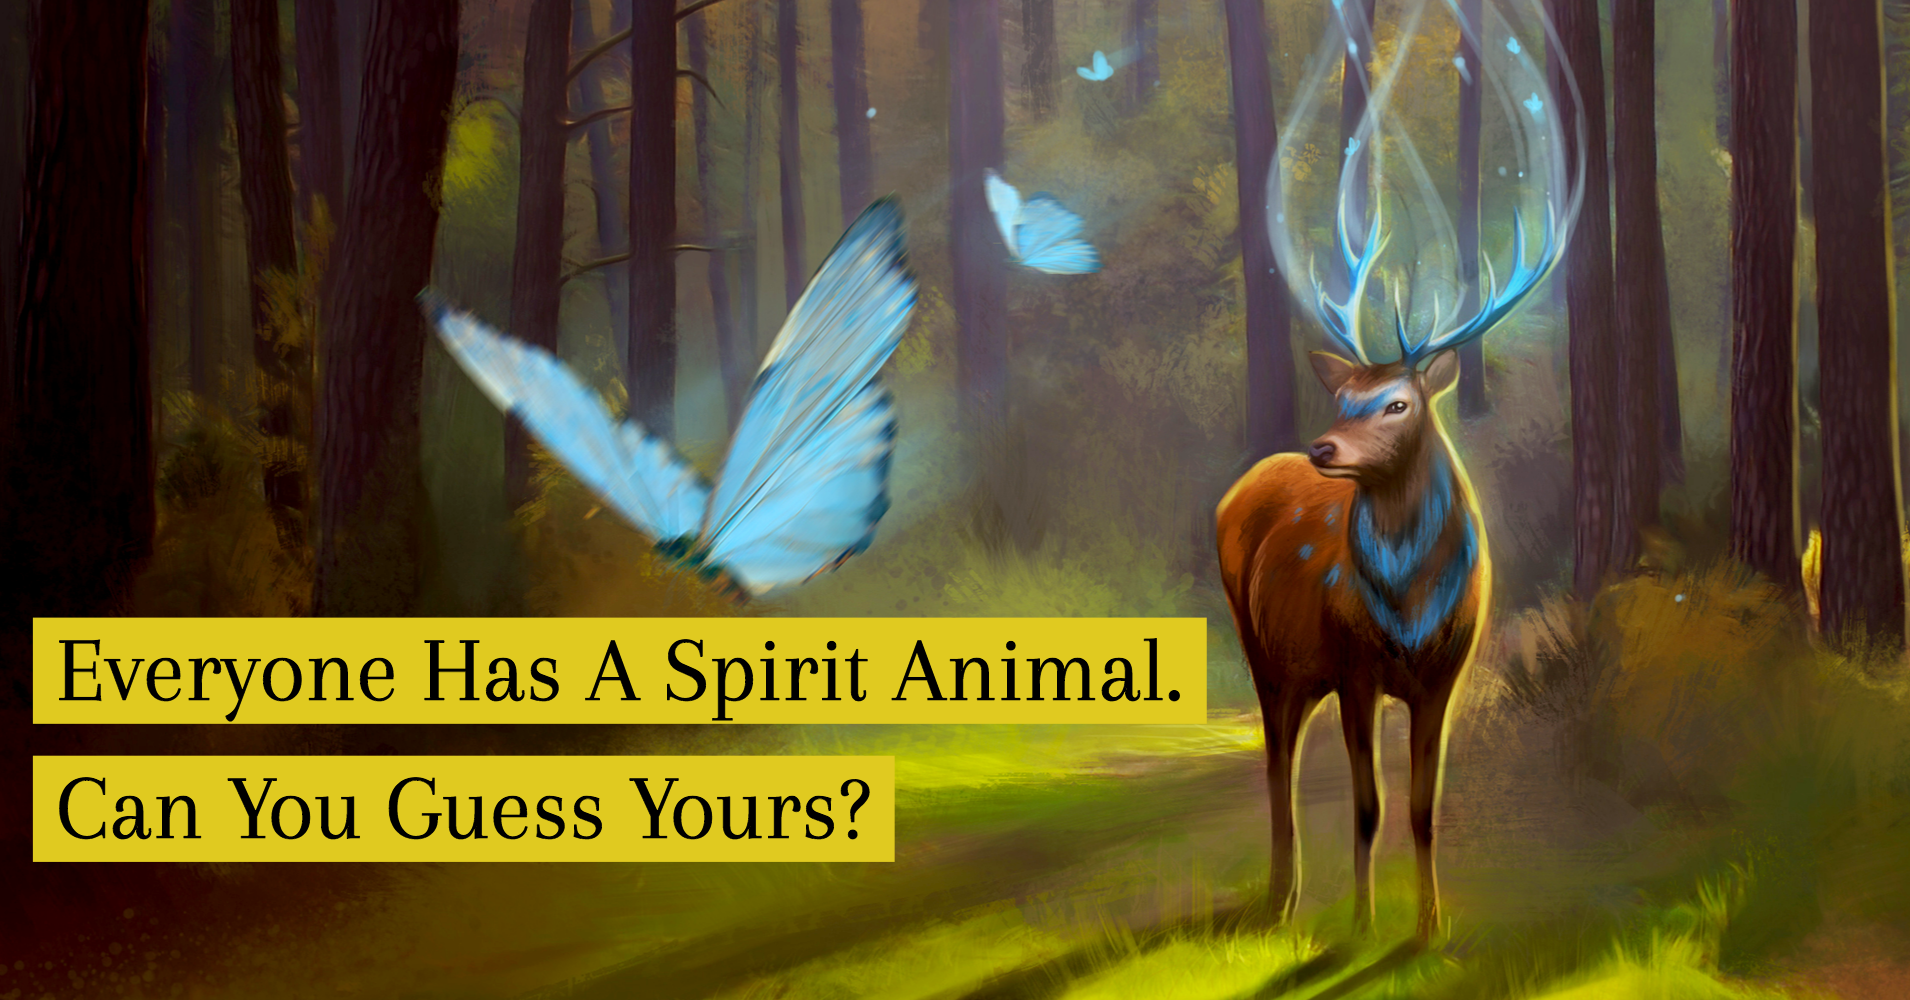 what is my spirit animal guide quiz